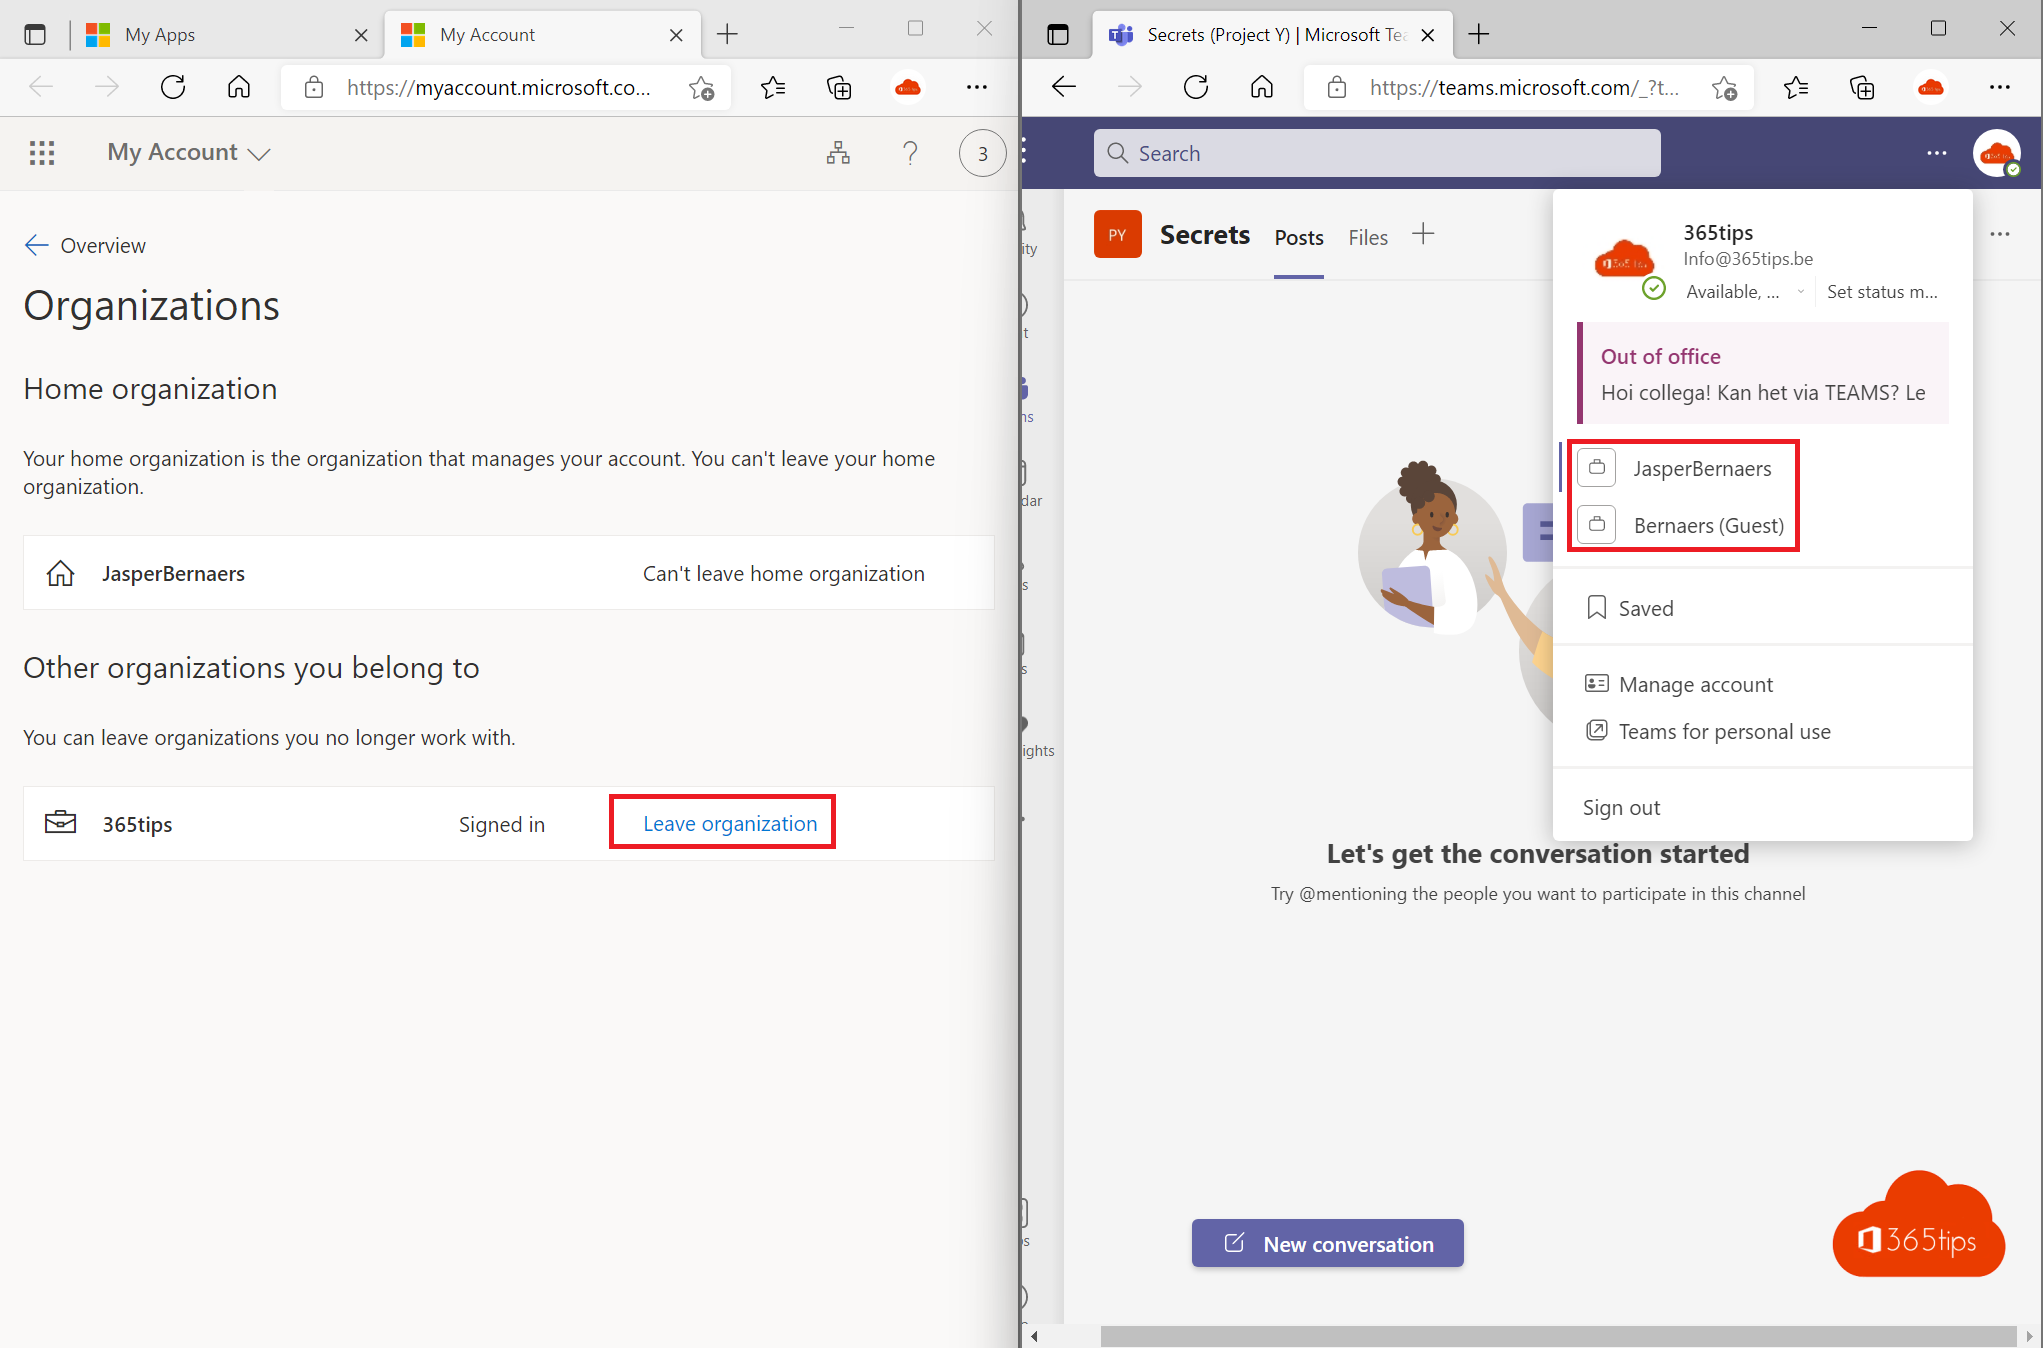 Remove yourself (as a guest) in another Microsoft Teams organization or tenant